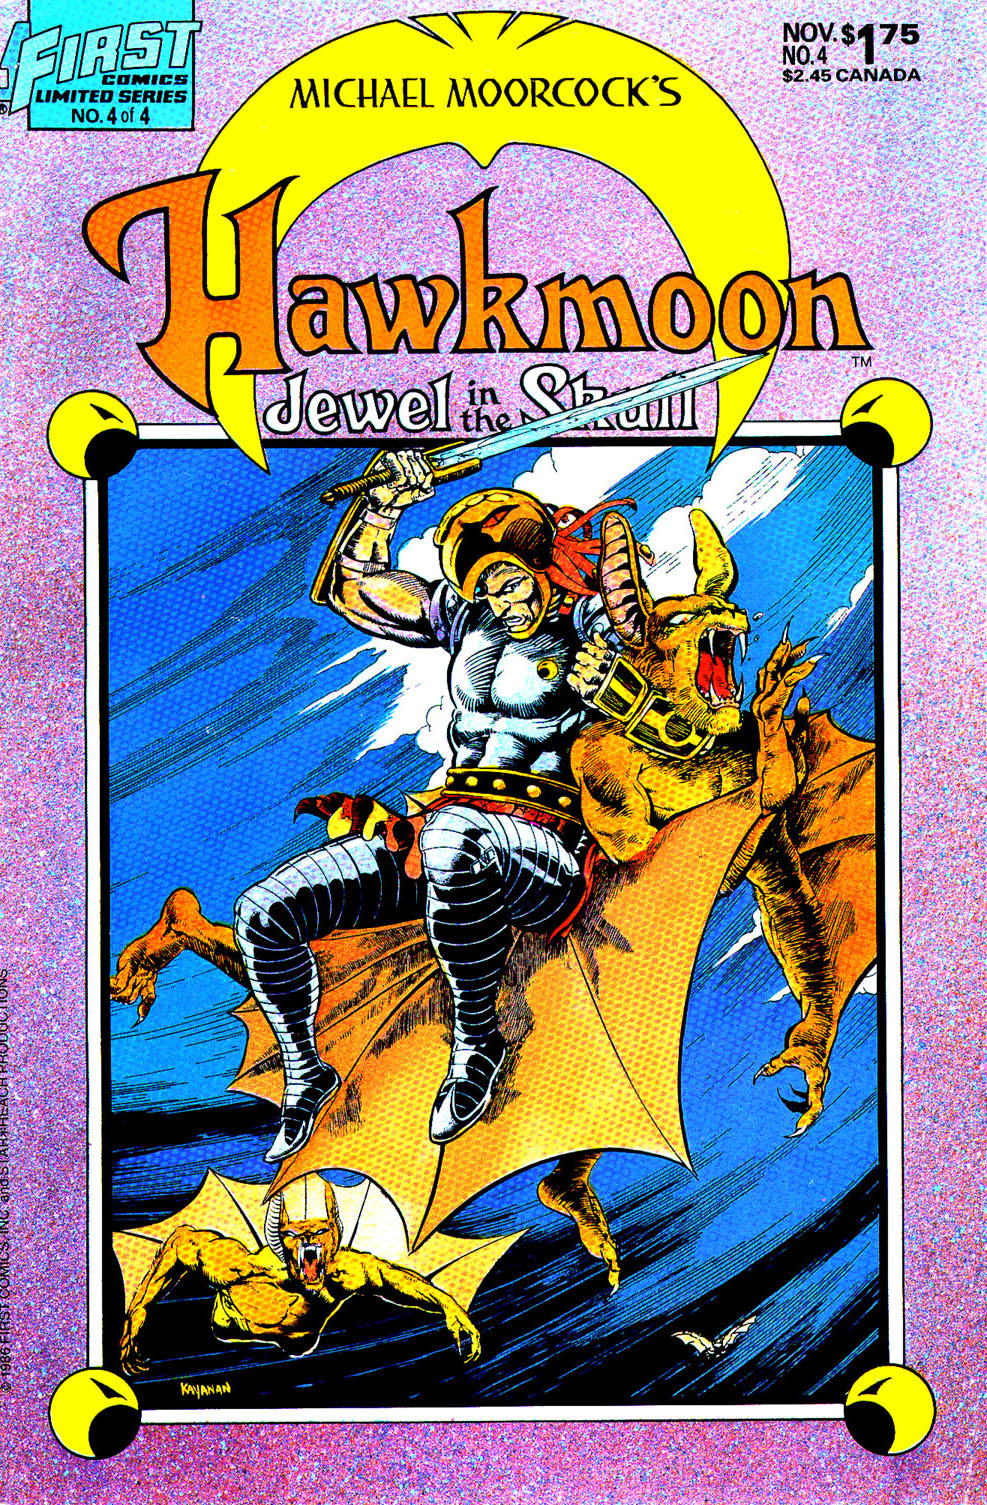 Read online Hawkmoon: The Jewel in the Skull comic -  Issue #4 - 1